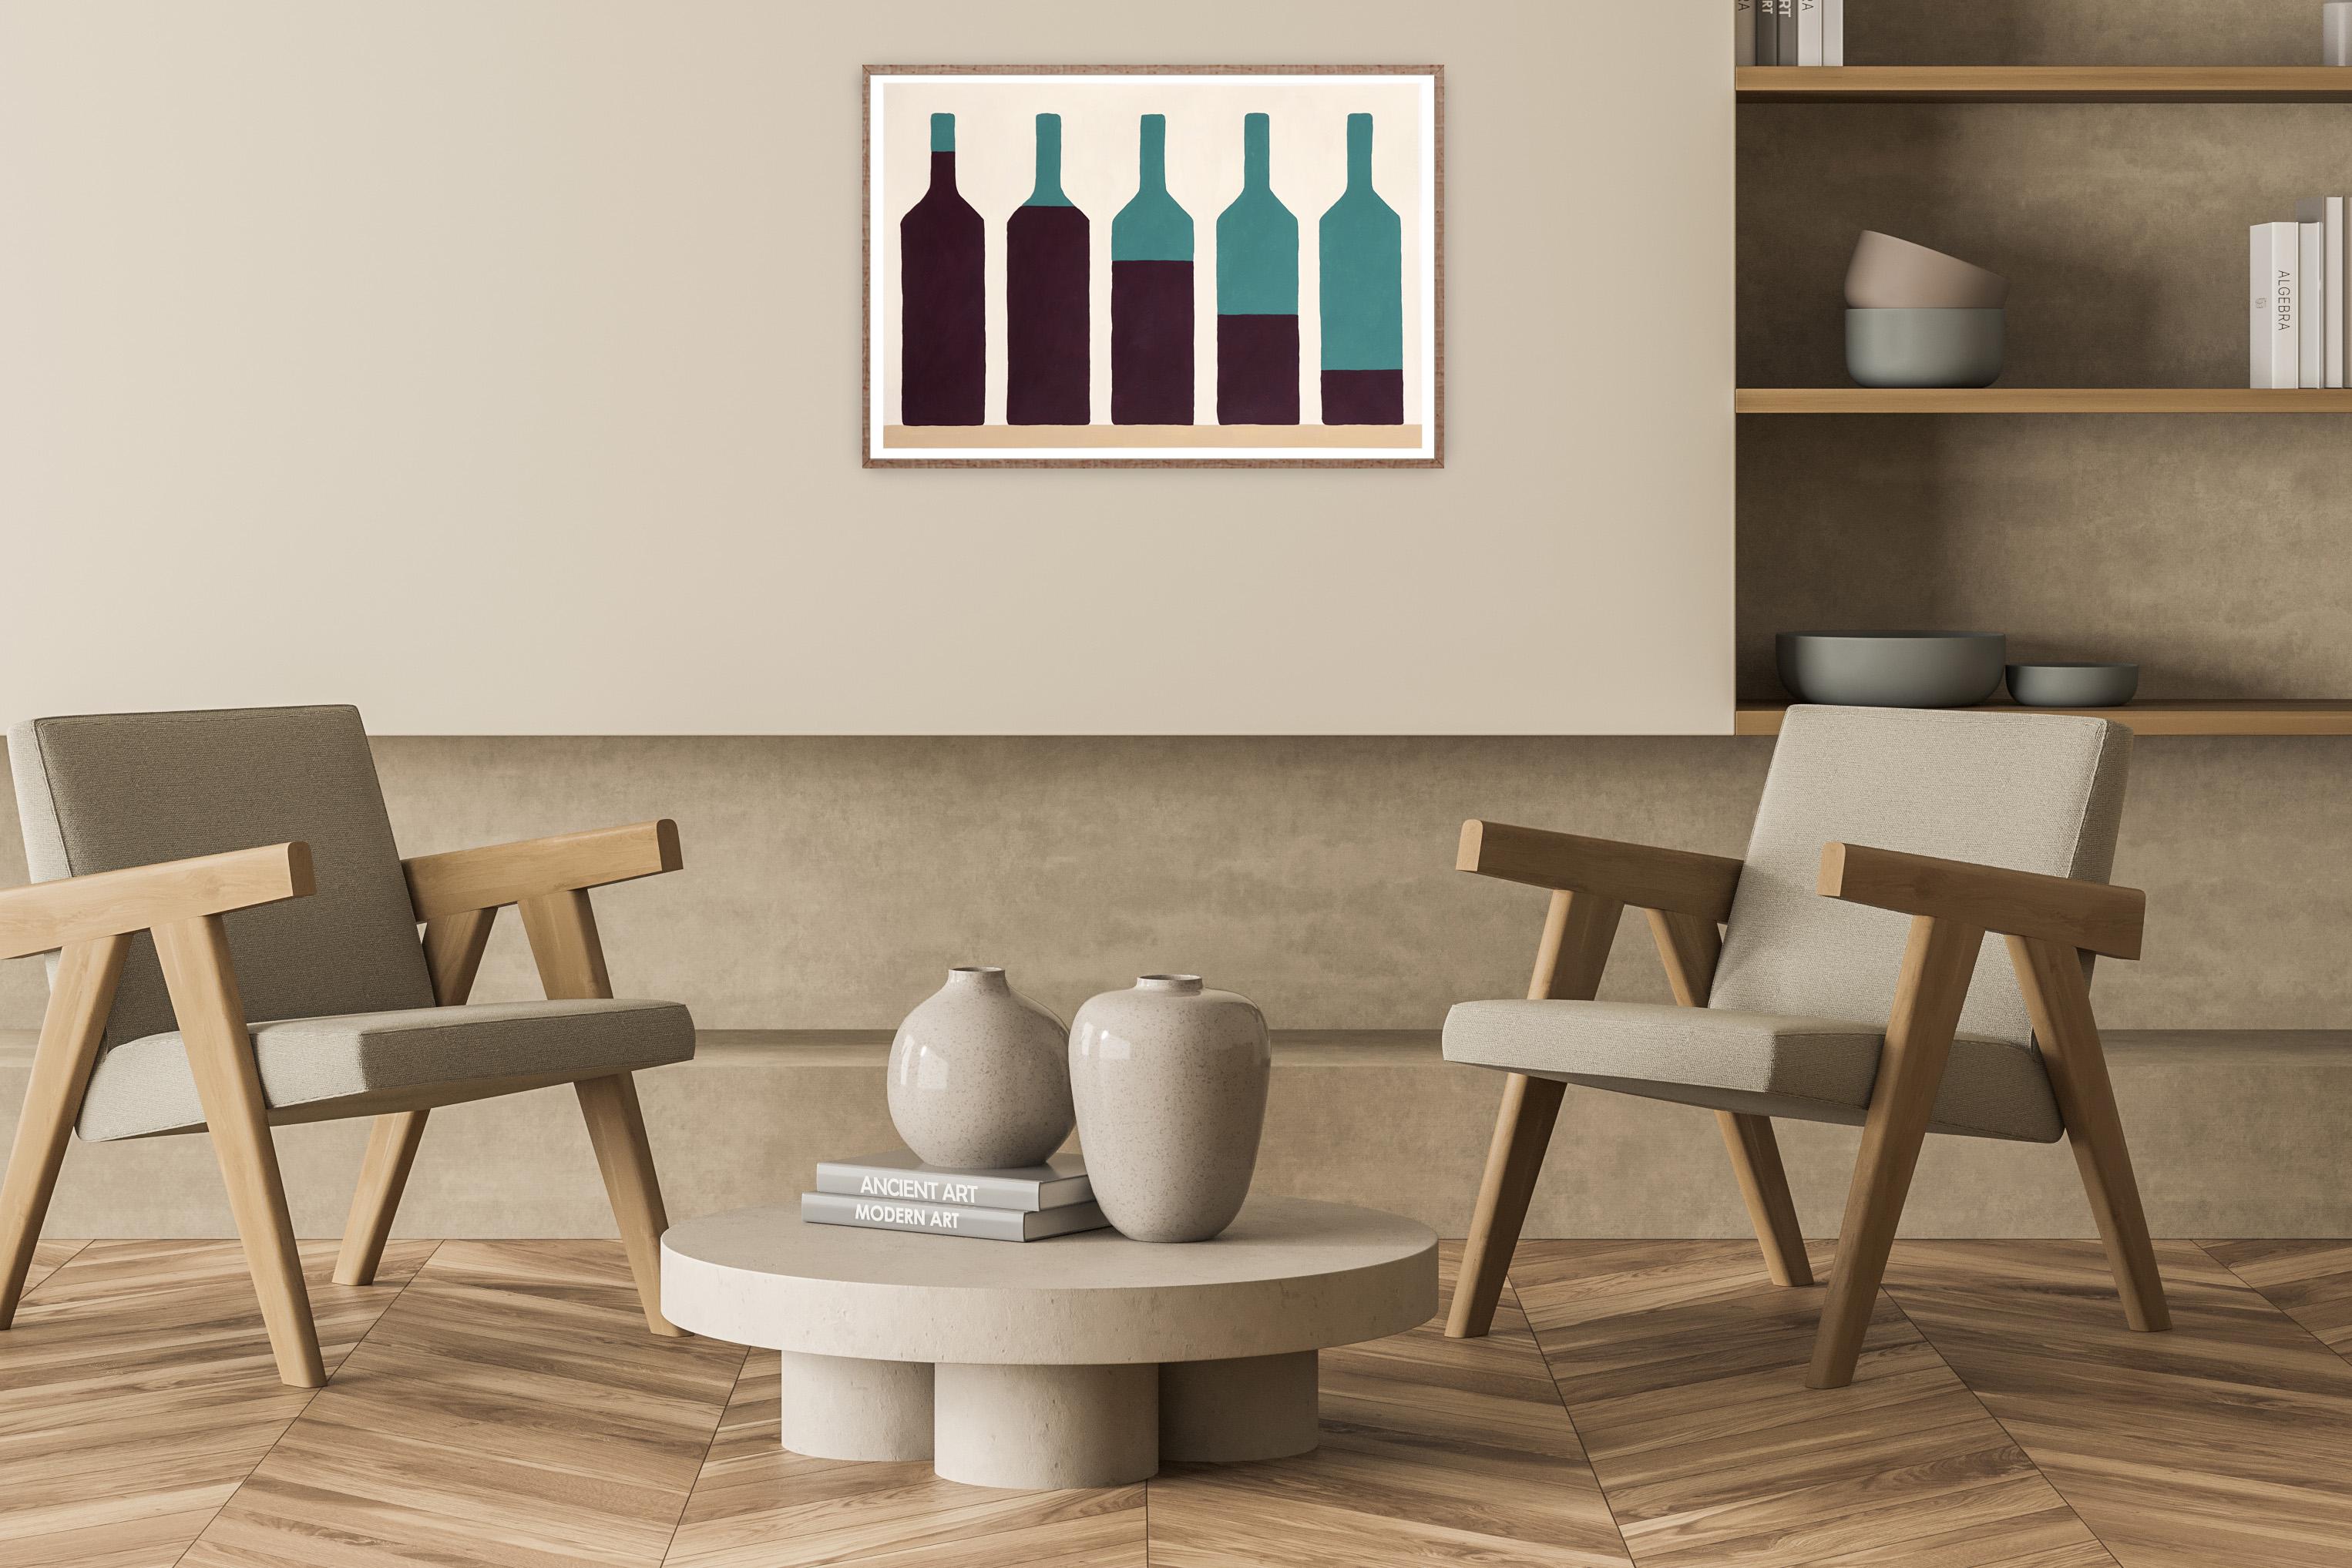 Five Wines, Modern Still Life of a Wine Cellar, Earth Tones, Naif Green Bottles - Painting by Gio Bellagio